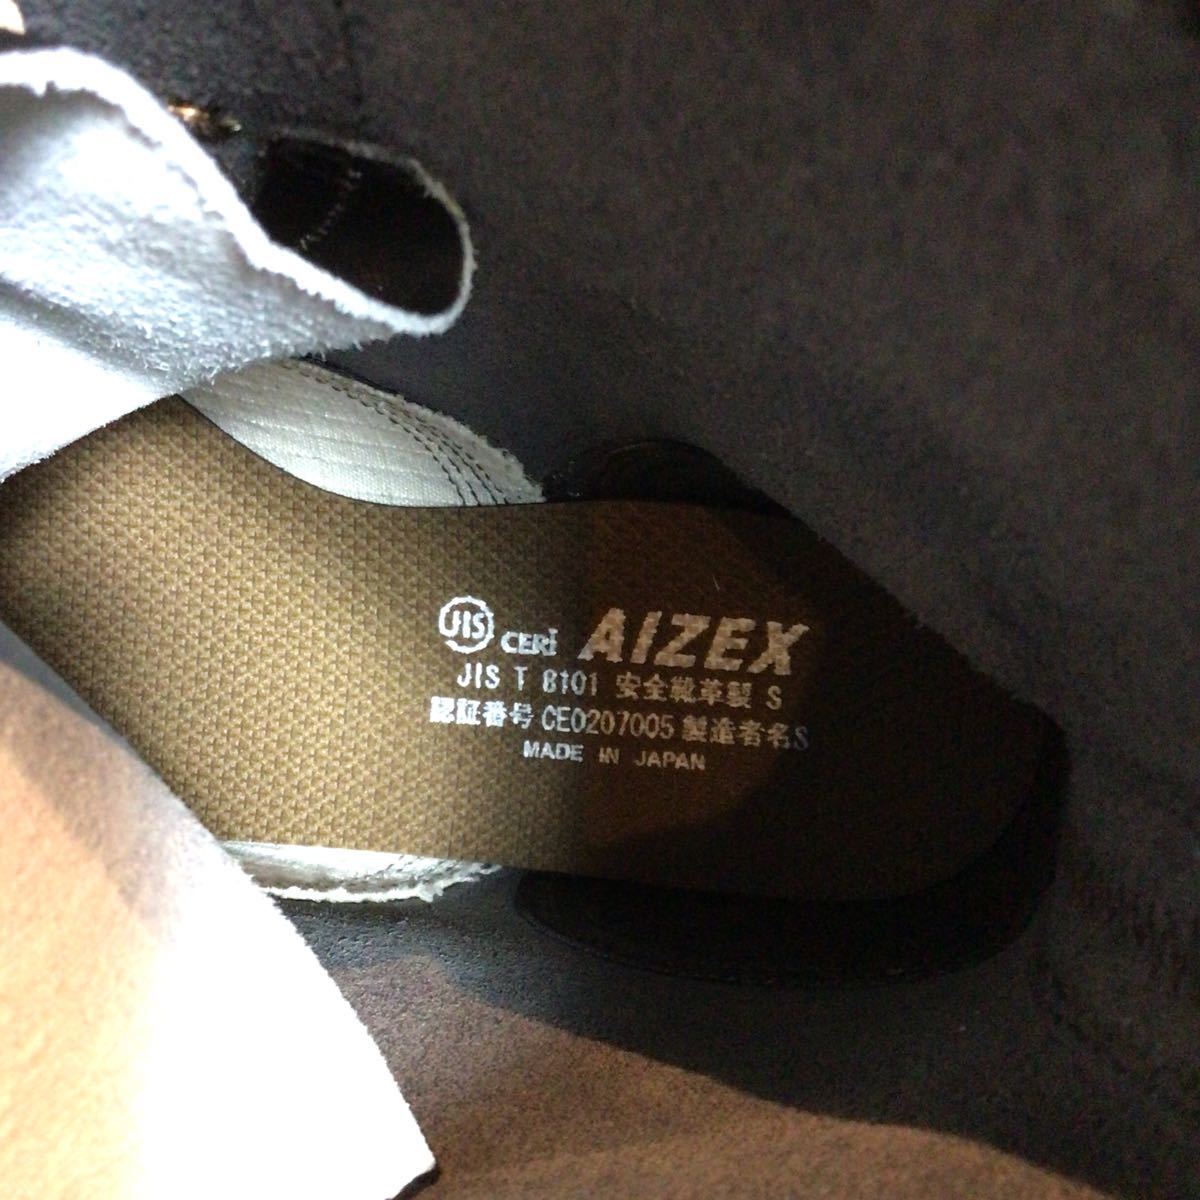 [ selling out! free shipping!]A-172 ①AIZEX!23.5cmEEE! safety shoes!AS28! length compilation on shoes! black!JIS standard! work shoes! braided up! new goods! unused! box equipped!